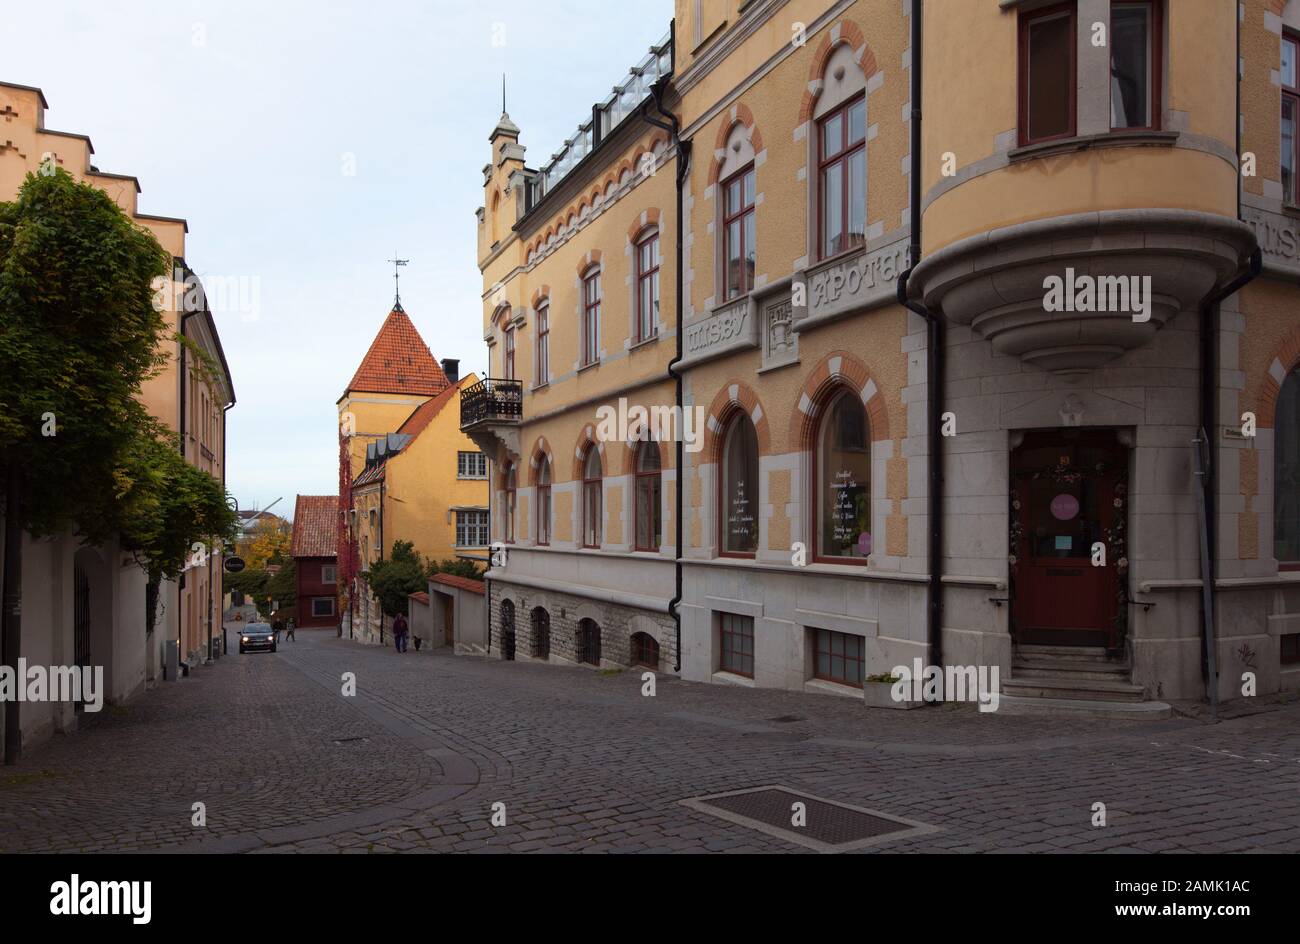 VISBY, SWEDEN ON OCTOBER 13, 2019. Street view of buildings. Old house, homes in the town. Unidentified folk. Editorial use. Stock Photo